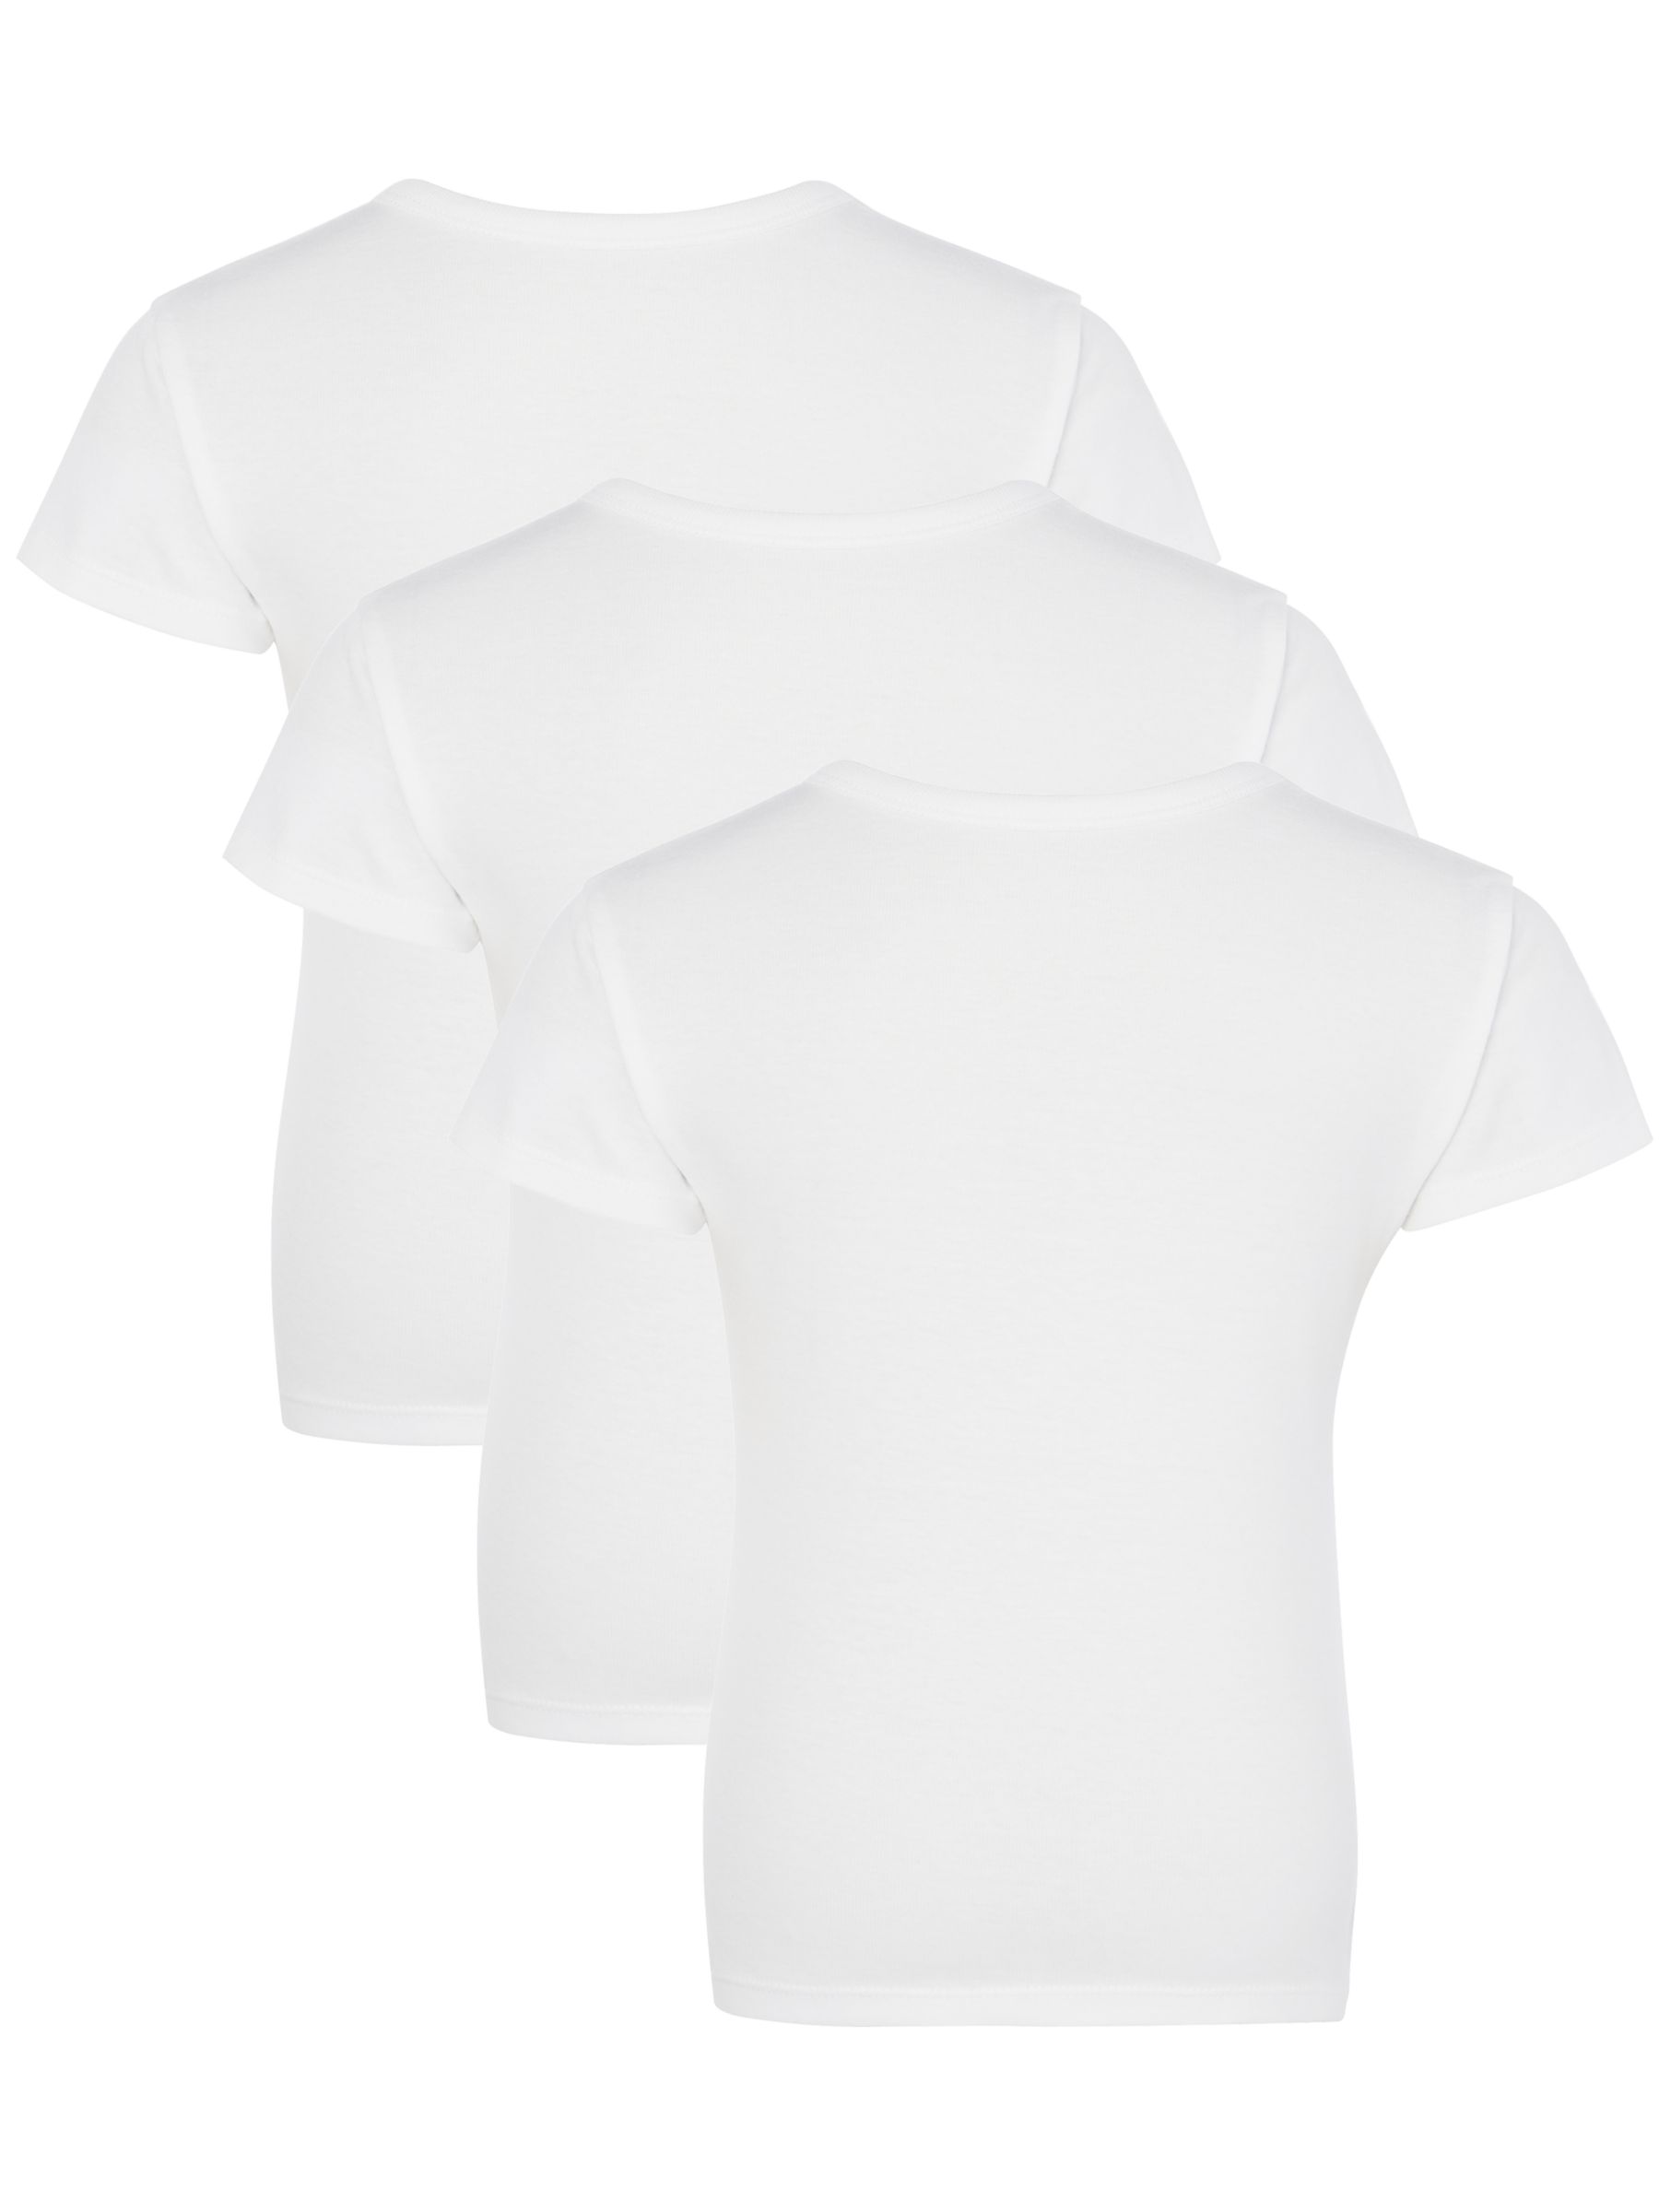 John Lewis ANYDAY Kids' Short Sleeve T-Shirt Vest, Pack of 3, White, 2 years